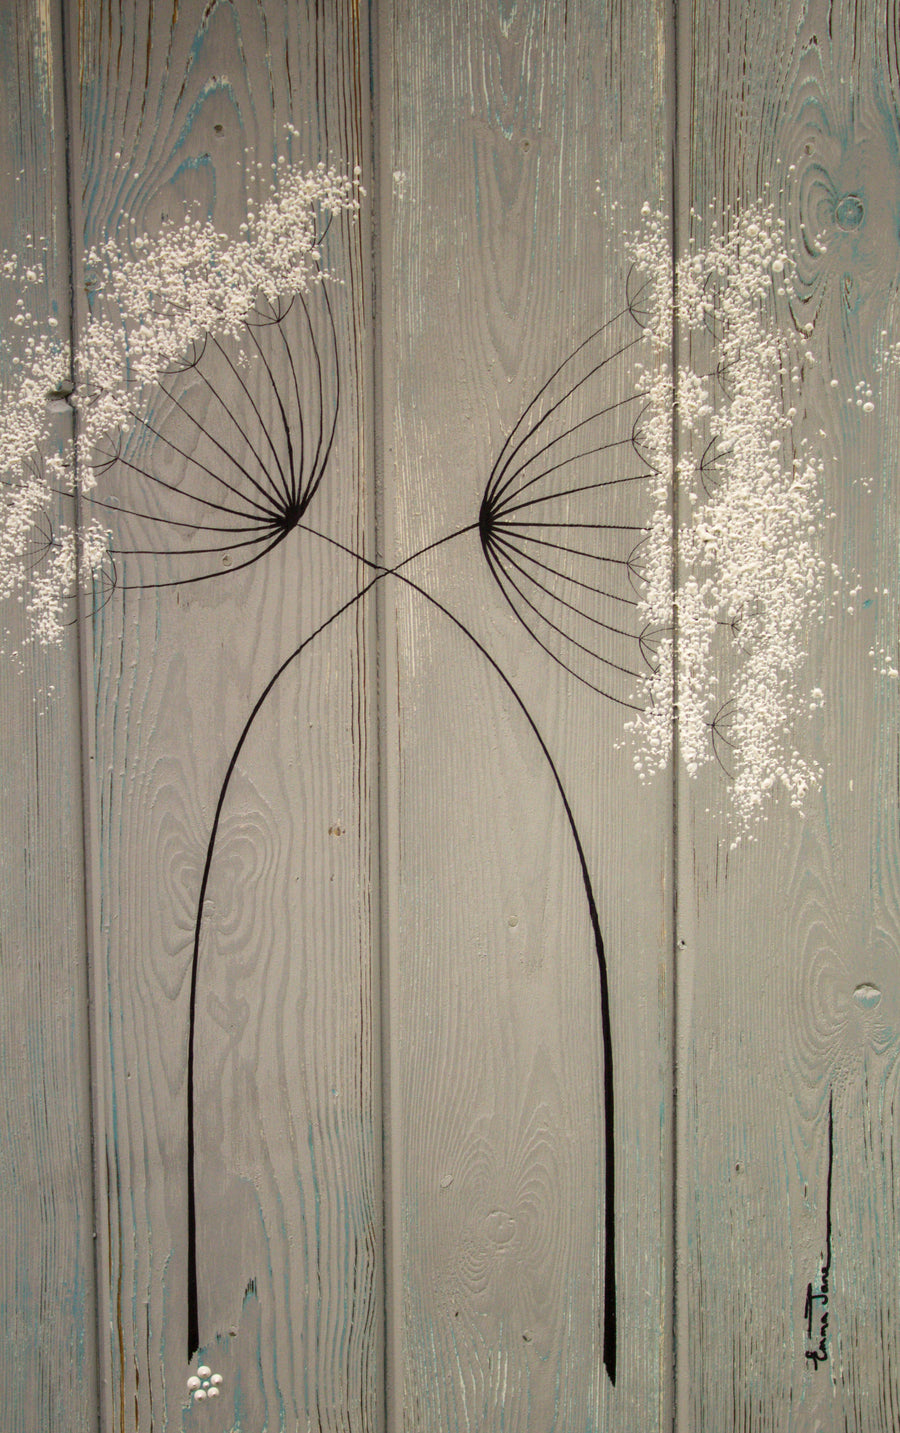 Cow Parsley soft grey / sky blue reclaimed wooden boards painting close up